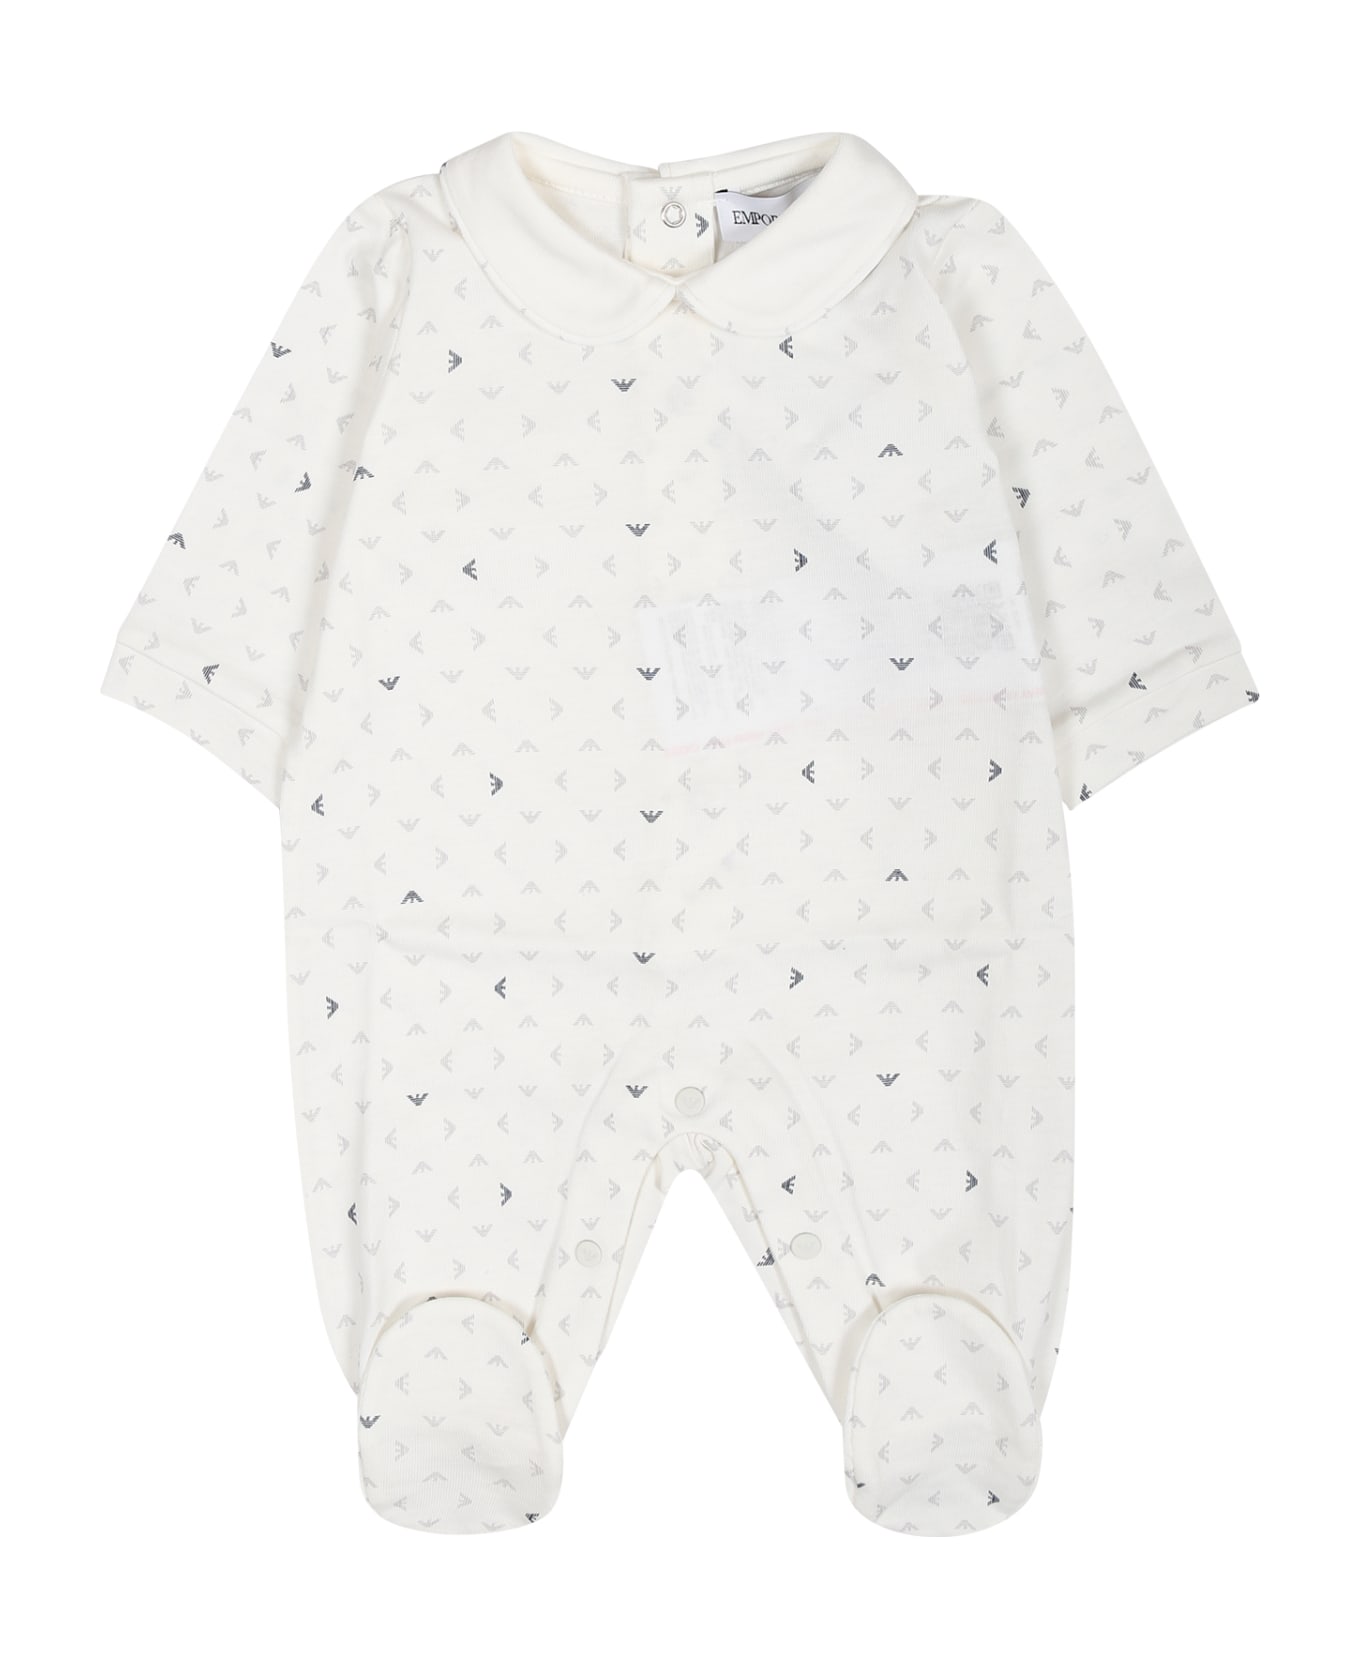 Emporio Armani Ivory Playsuit For Baby Boy With All-over Eagle Logo - Ivory